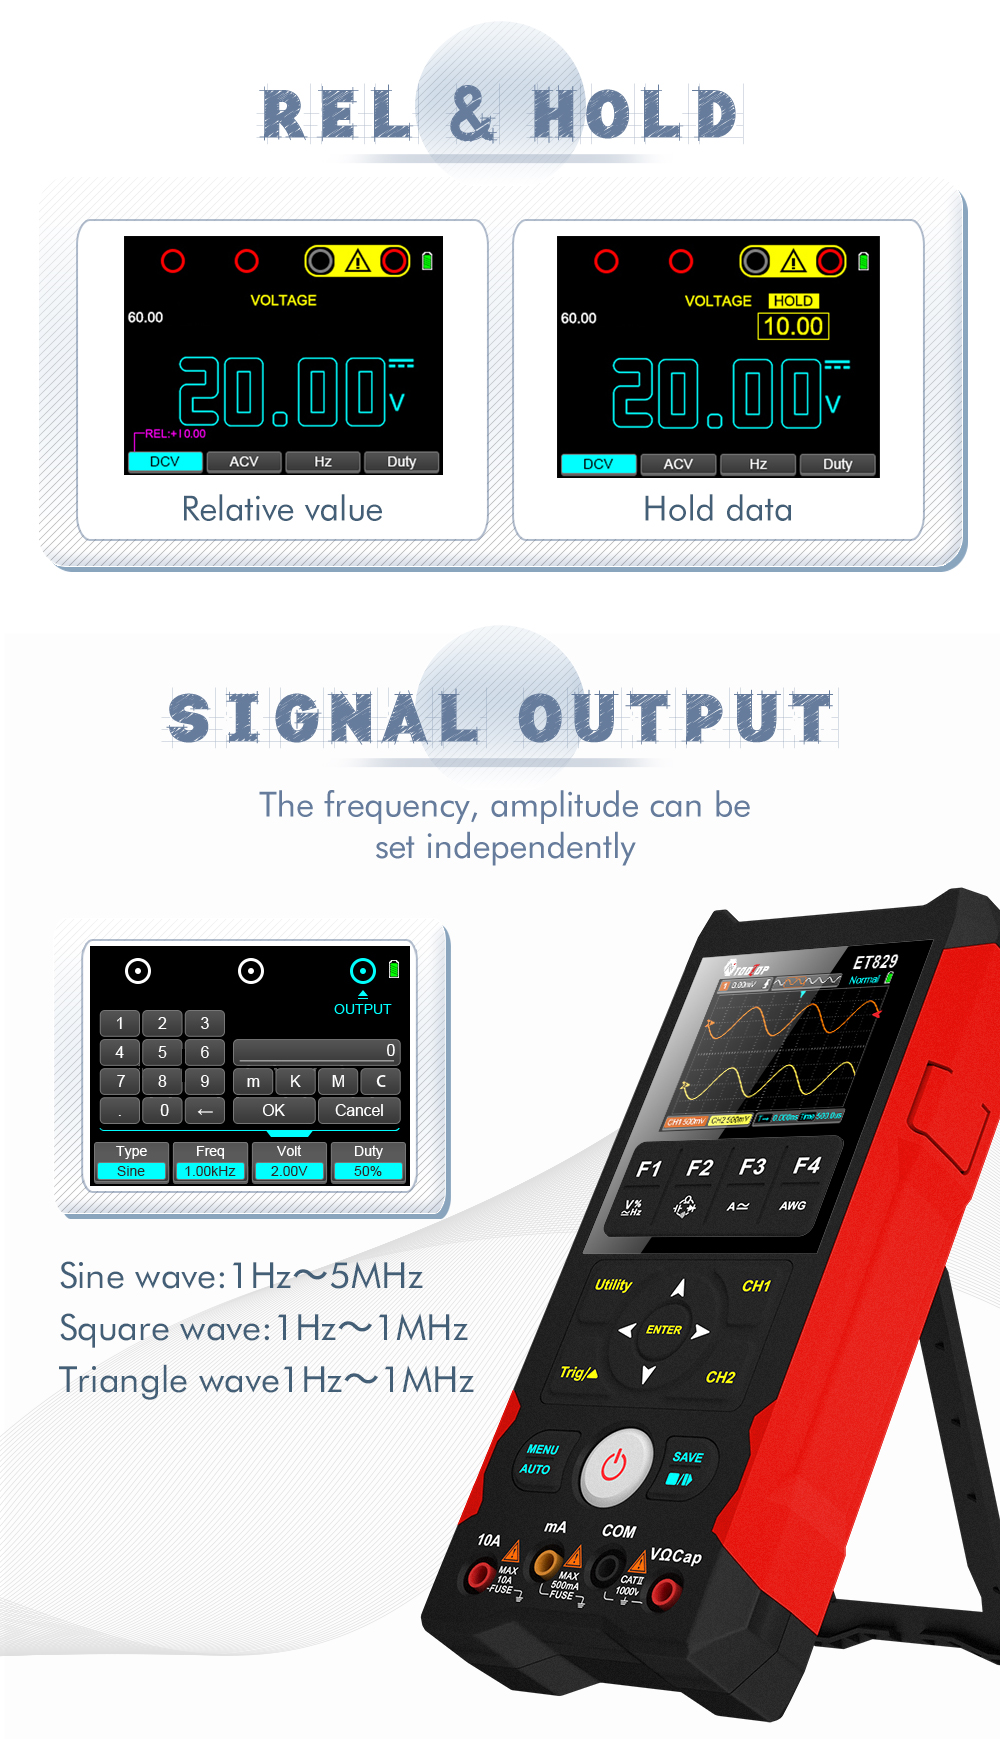 TOOLTOP ET829 OSC + DMM + Waveform Generator 3 in 1 80MHz Bandwidth Dual Channel Handheld Oscilloscope Innovative AI Waveform Preview